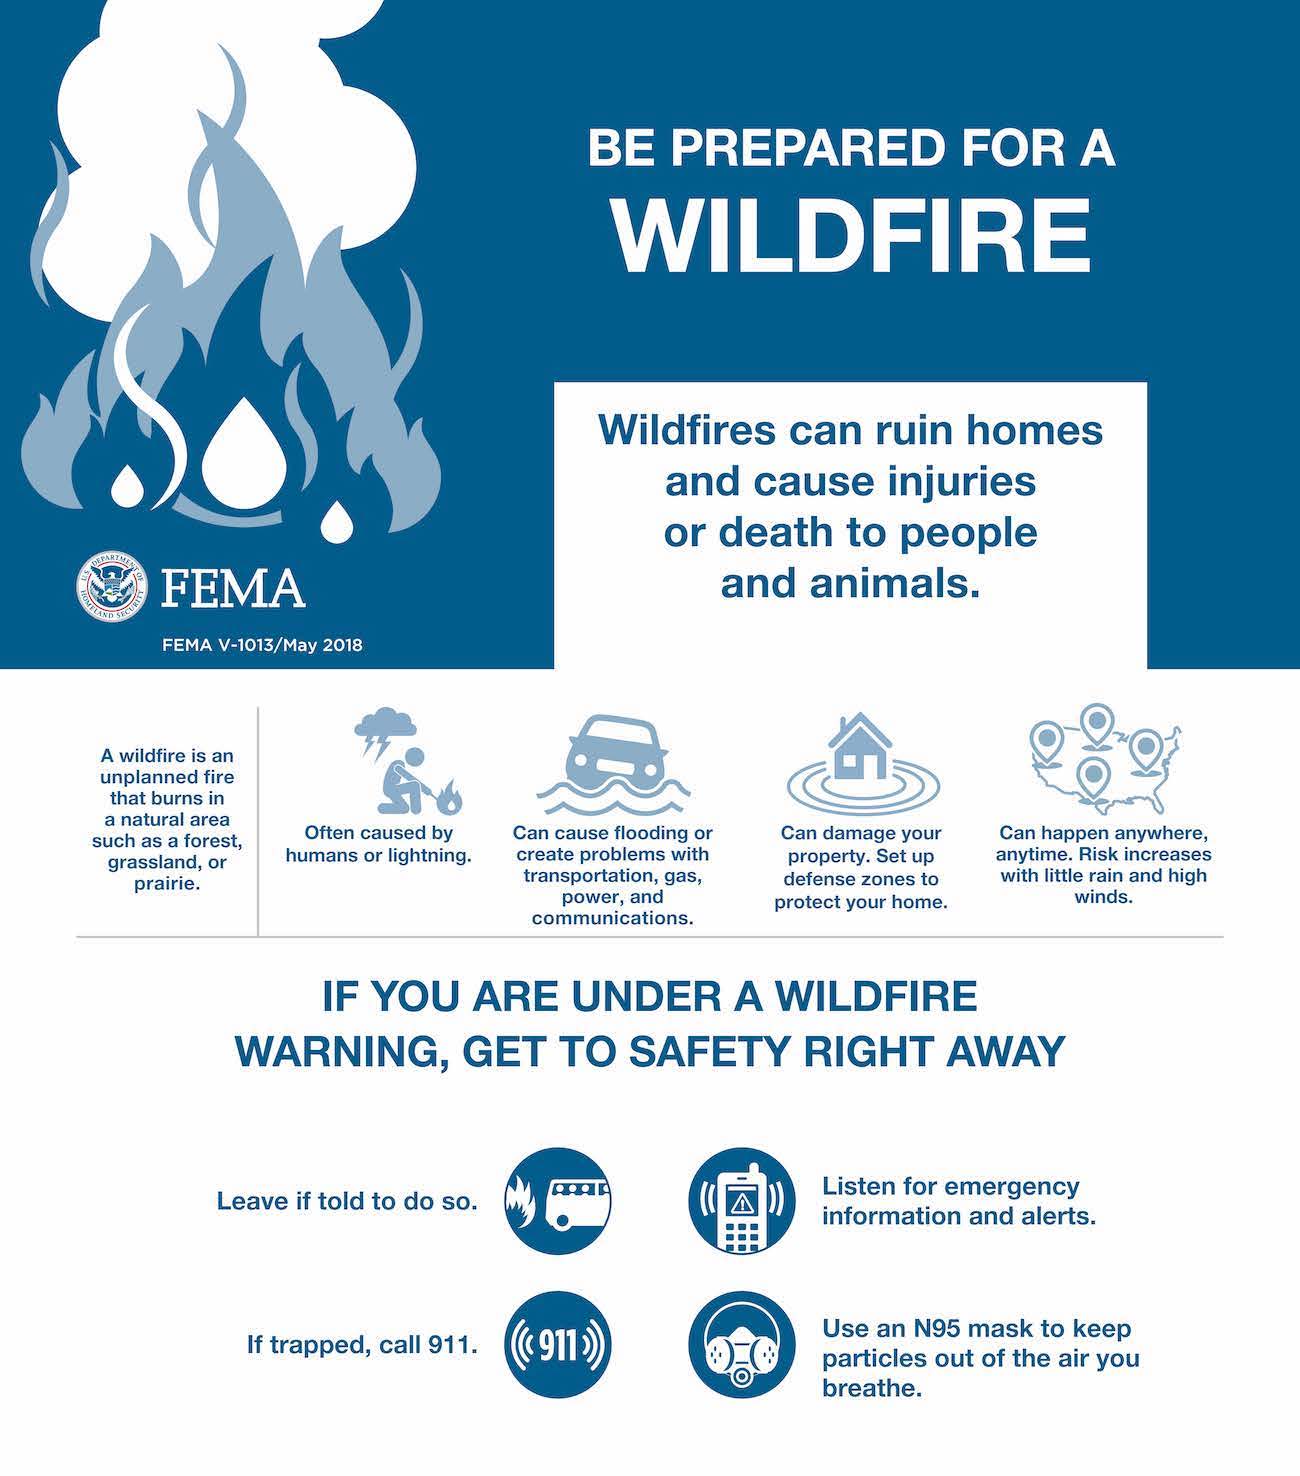 Be prepared for a wildfire